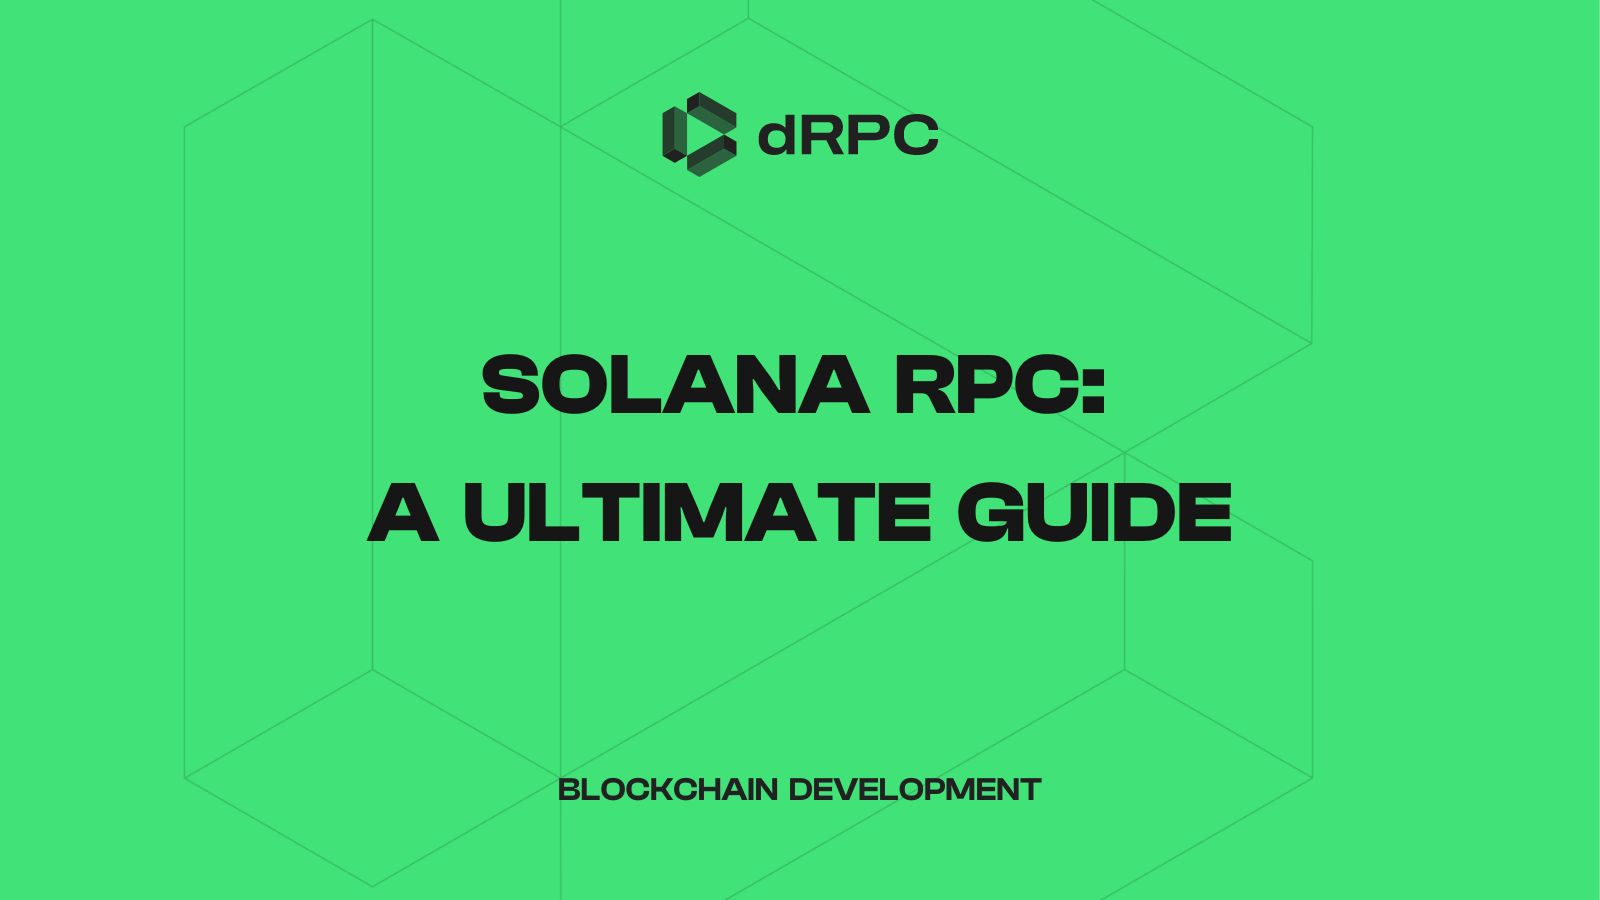 Solana RPC: A Ultimate Guide